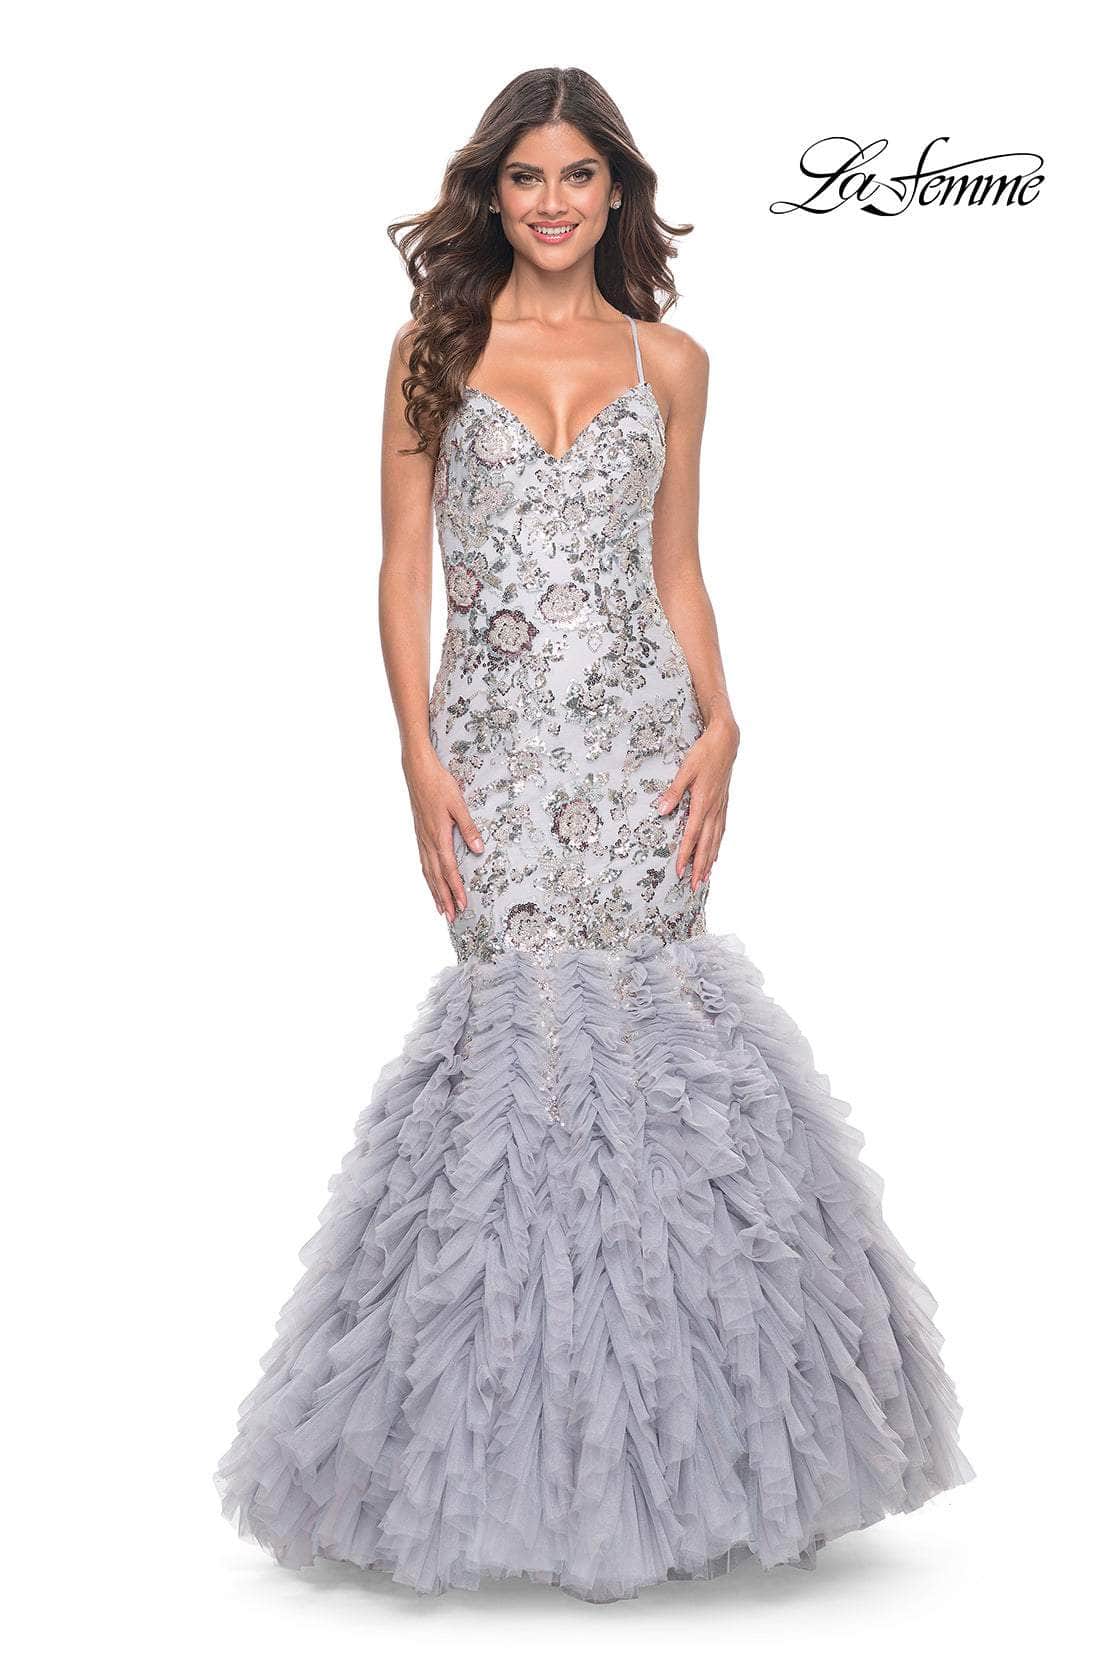 La Femme 32105 - Lace-Up Back Ruffled Mermaid Prom Gown
